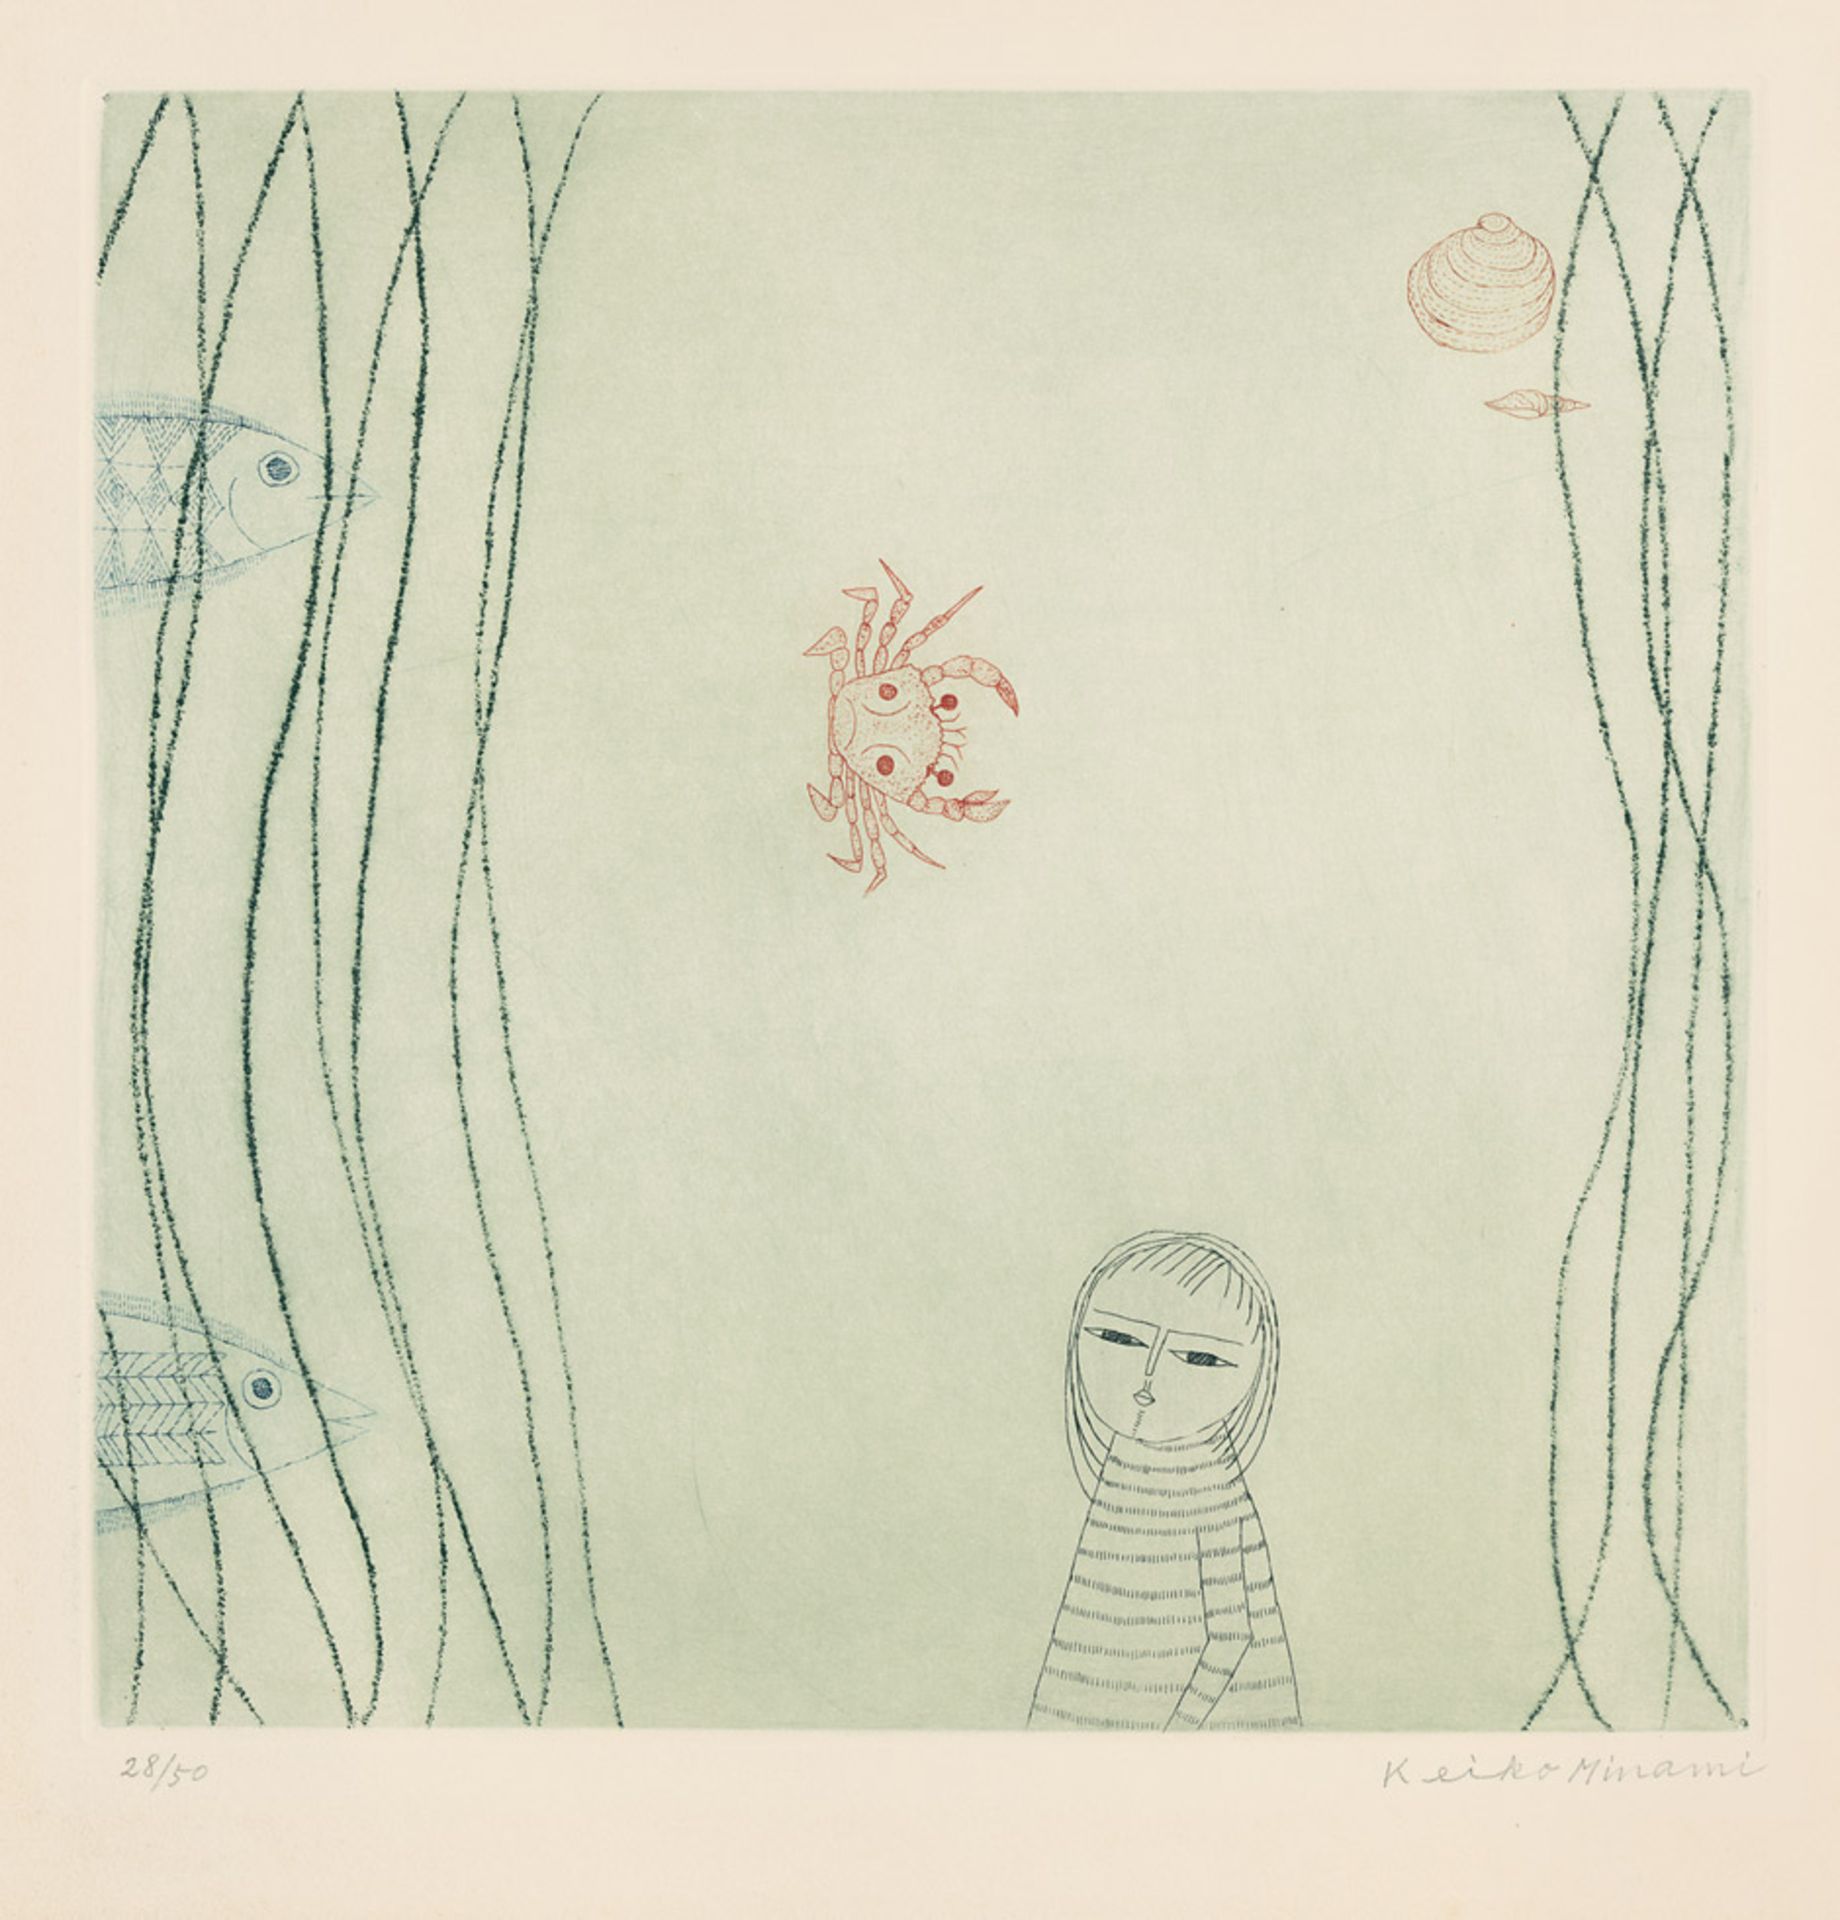 La Mer (Seaside) Color etching with aquatint and soft-ground etching on wove paper. 1963. 29,7 x